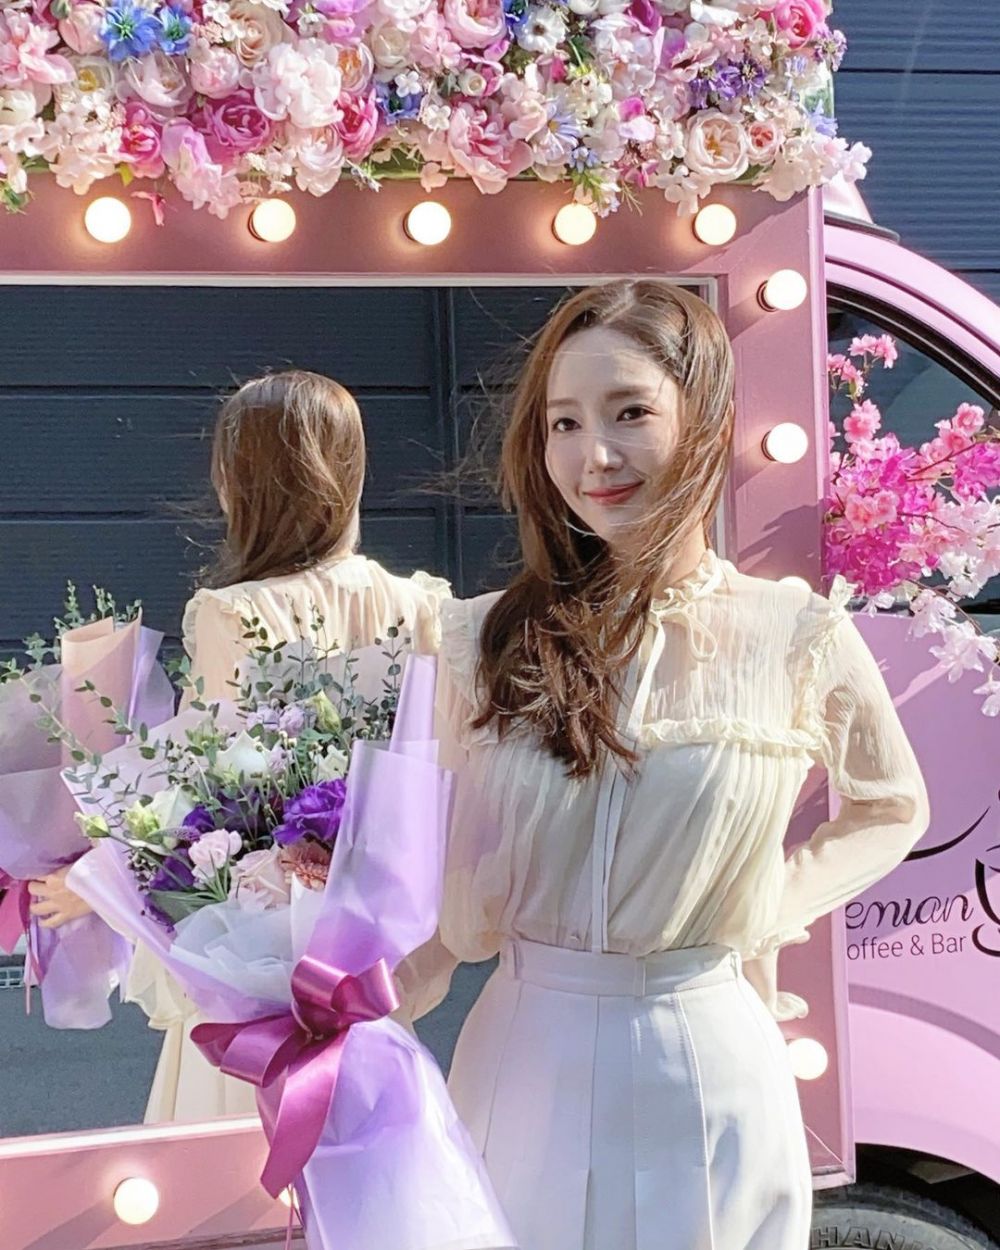 9 Ide Outfit Kantoran Park Min Young, Cool Tapi Manis!